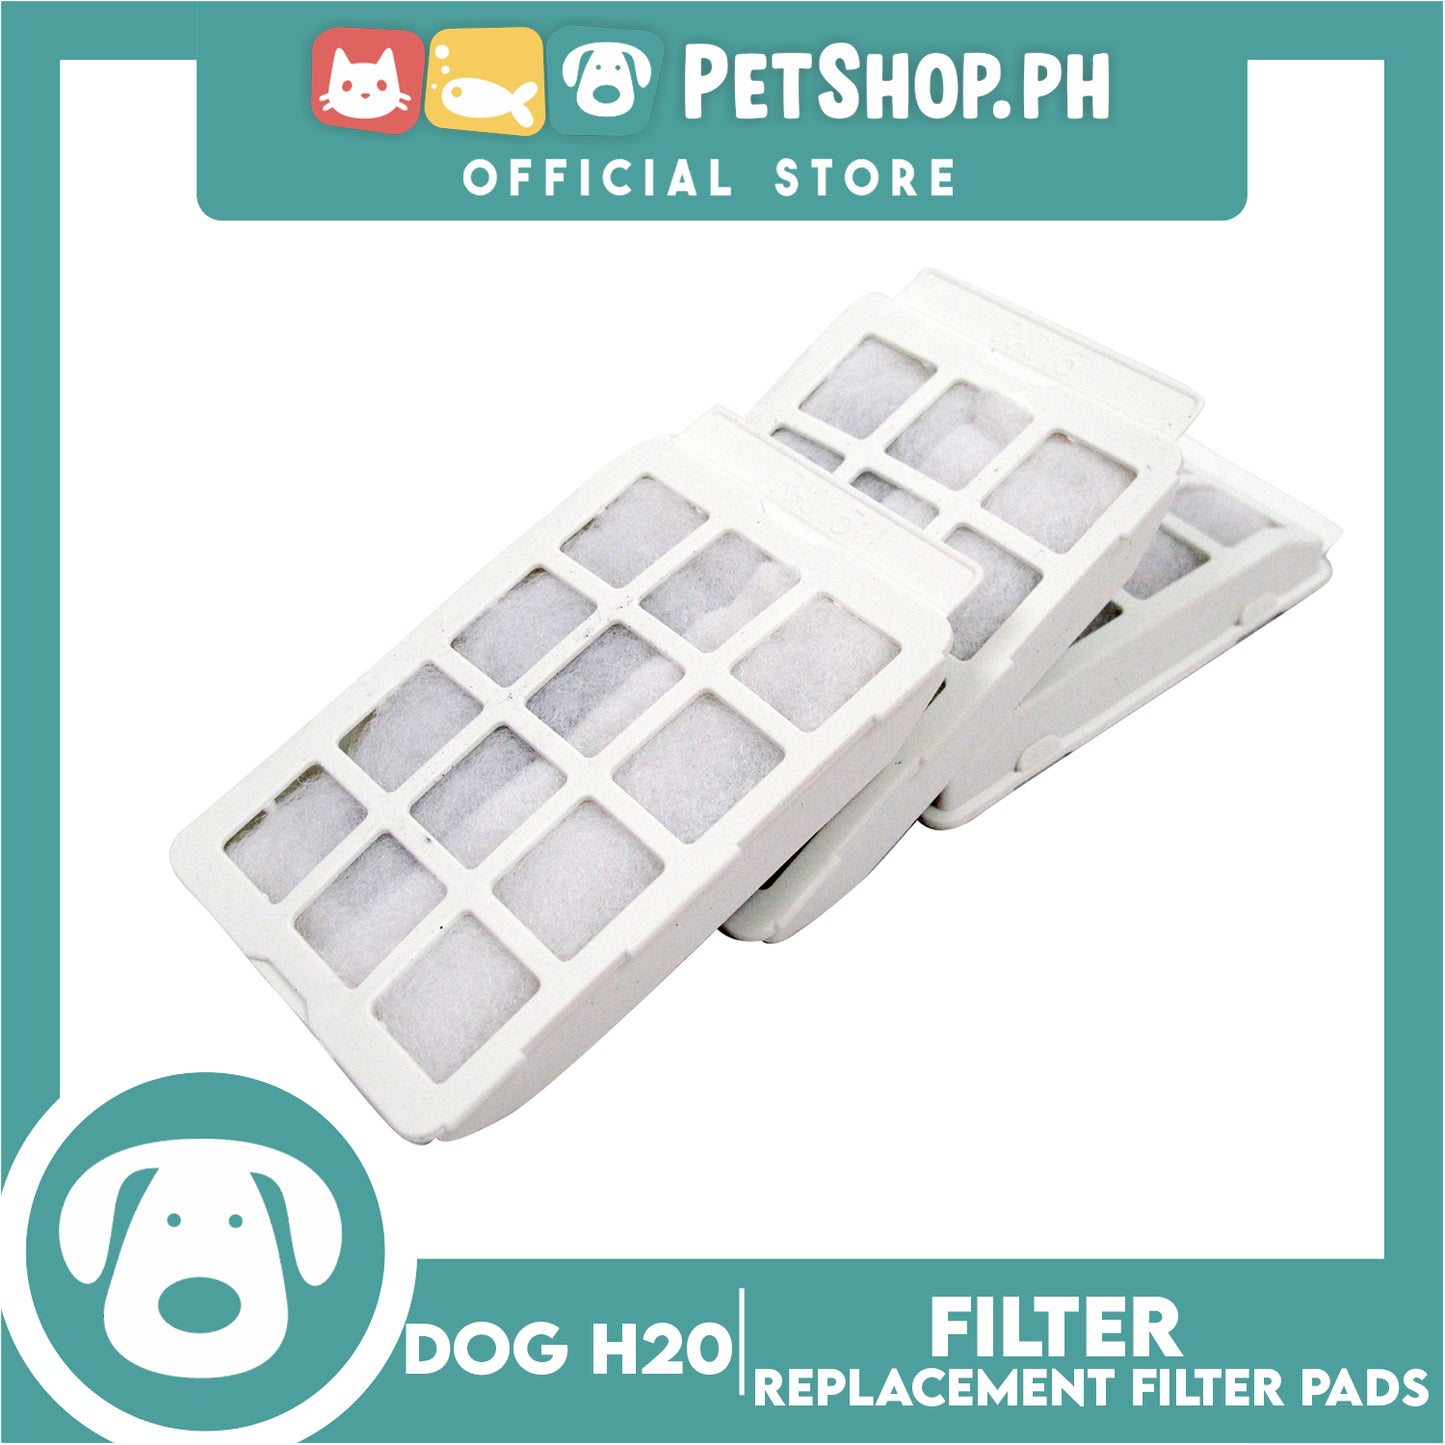 Dog H20 Fountain Filter Replacement 3 Pads